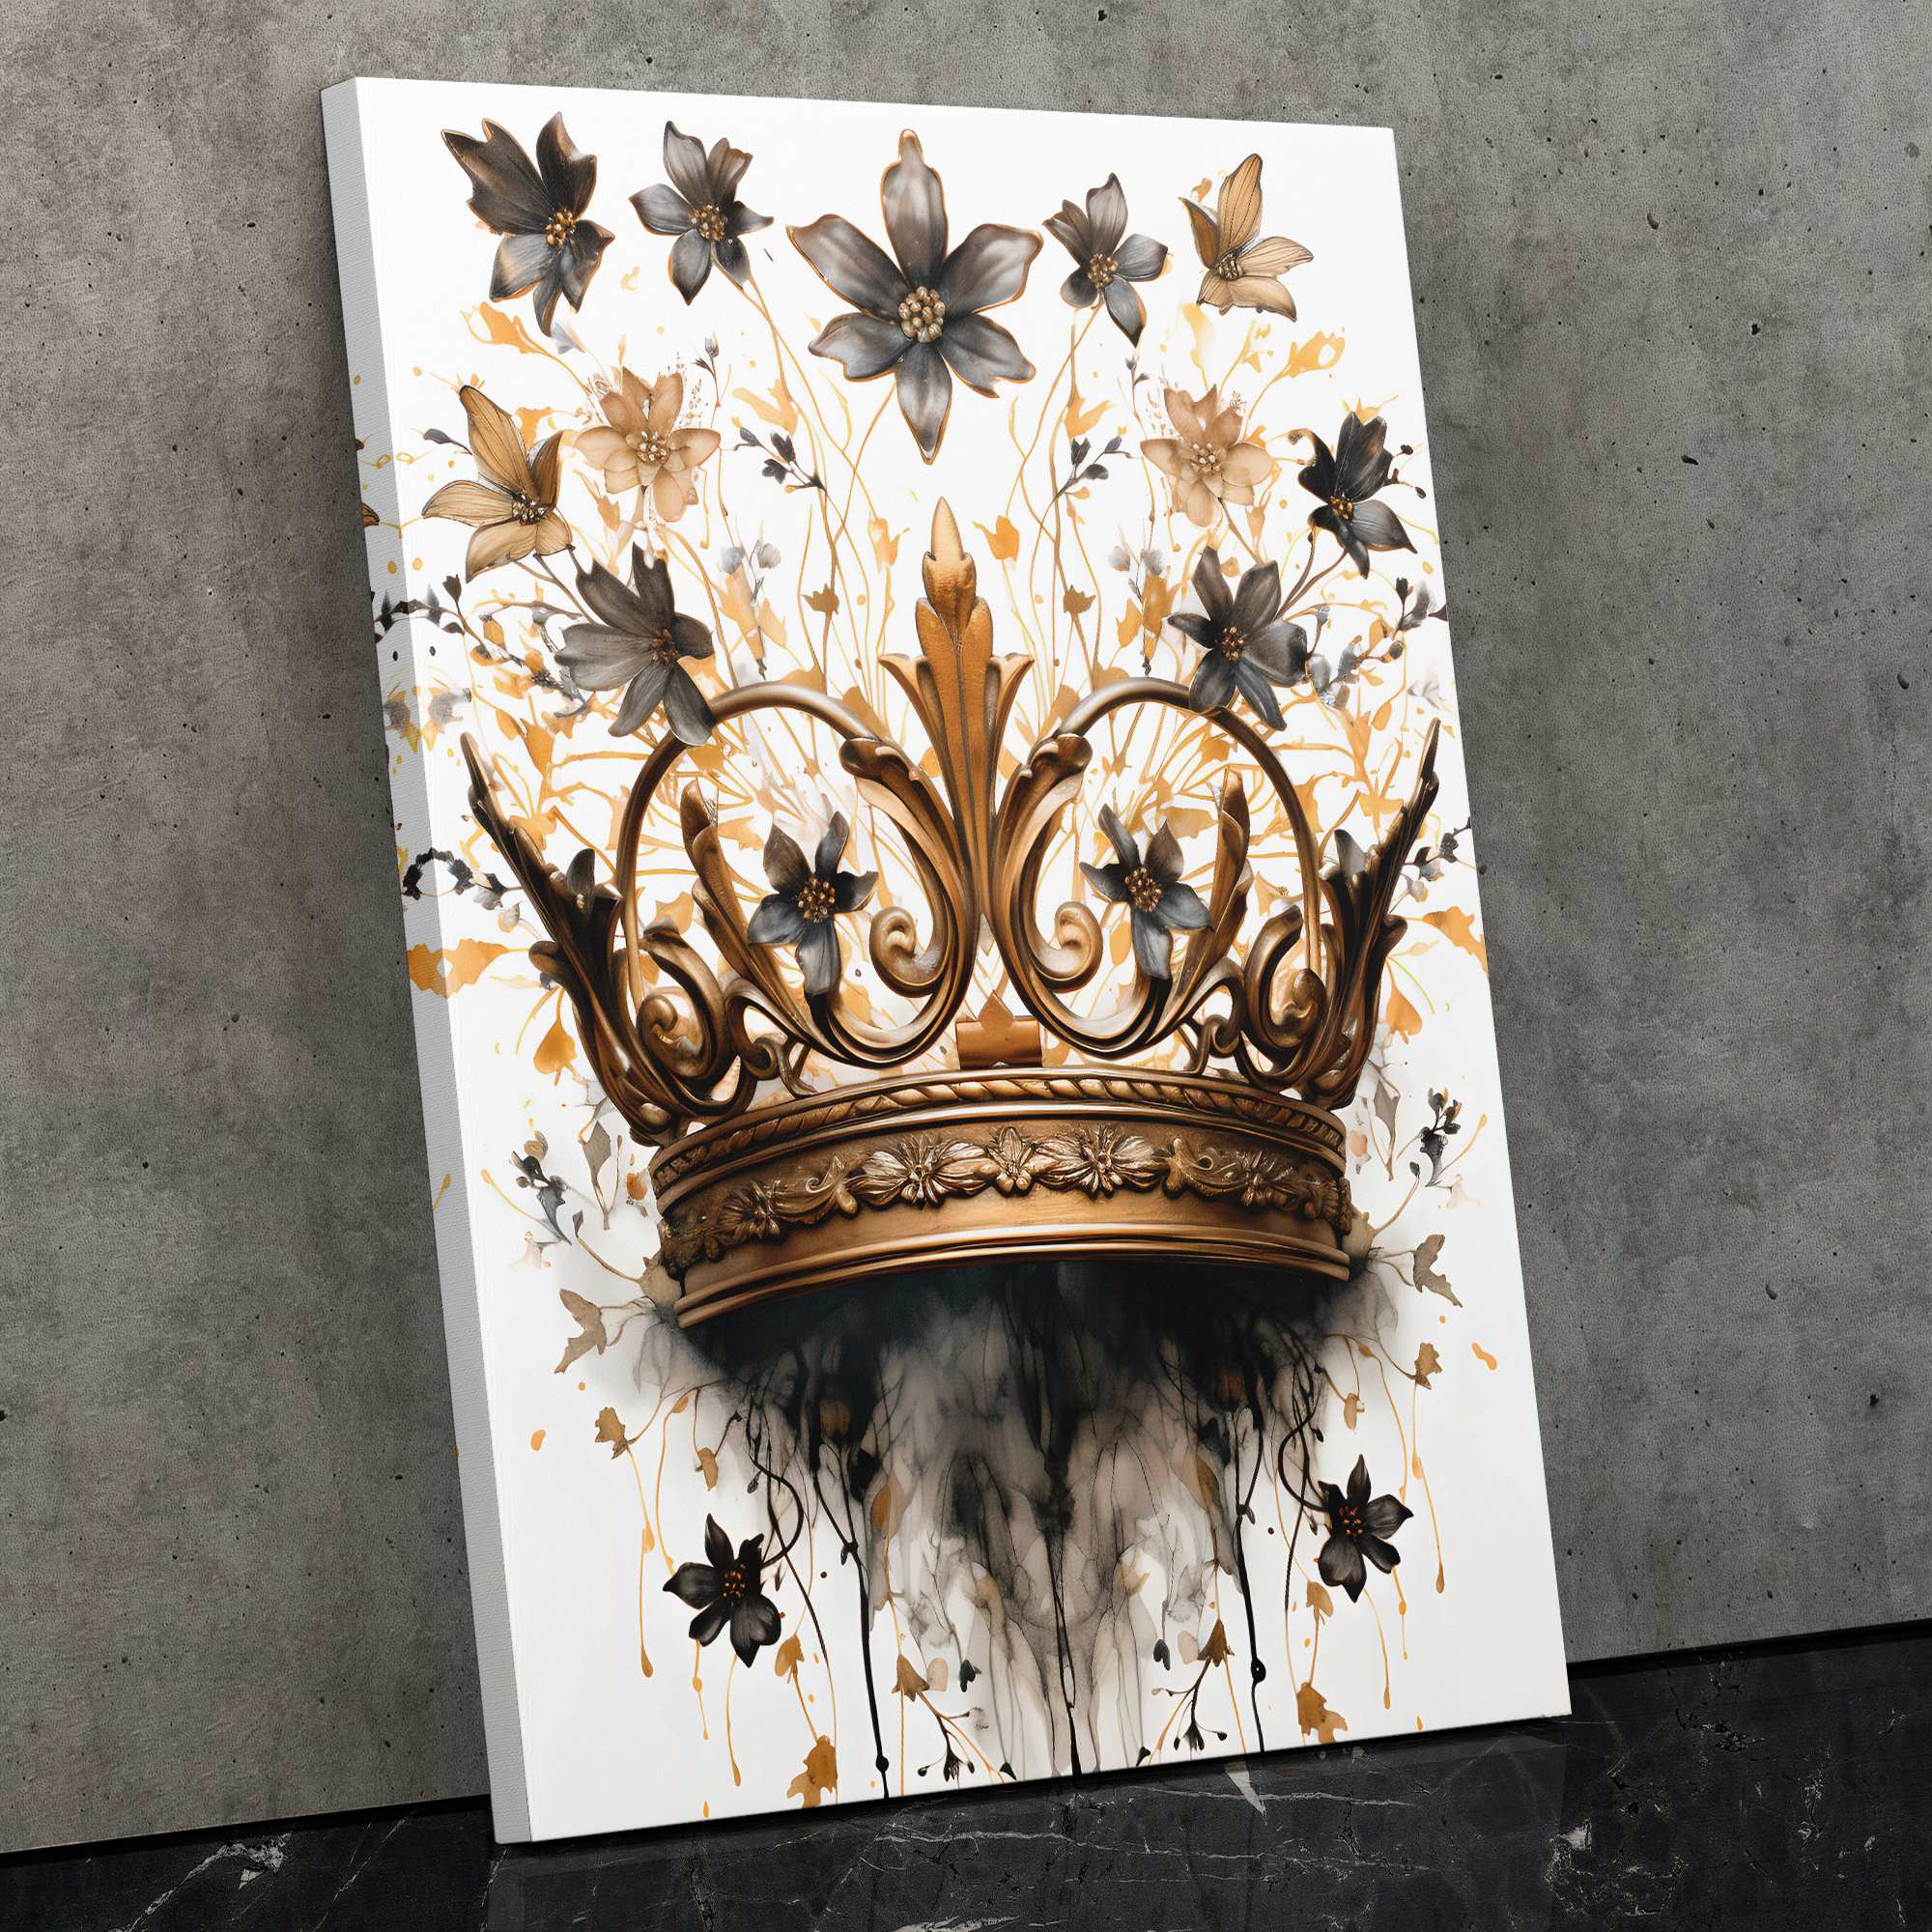 Gold Gothic Crown - Luxury Wall Art